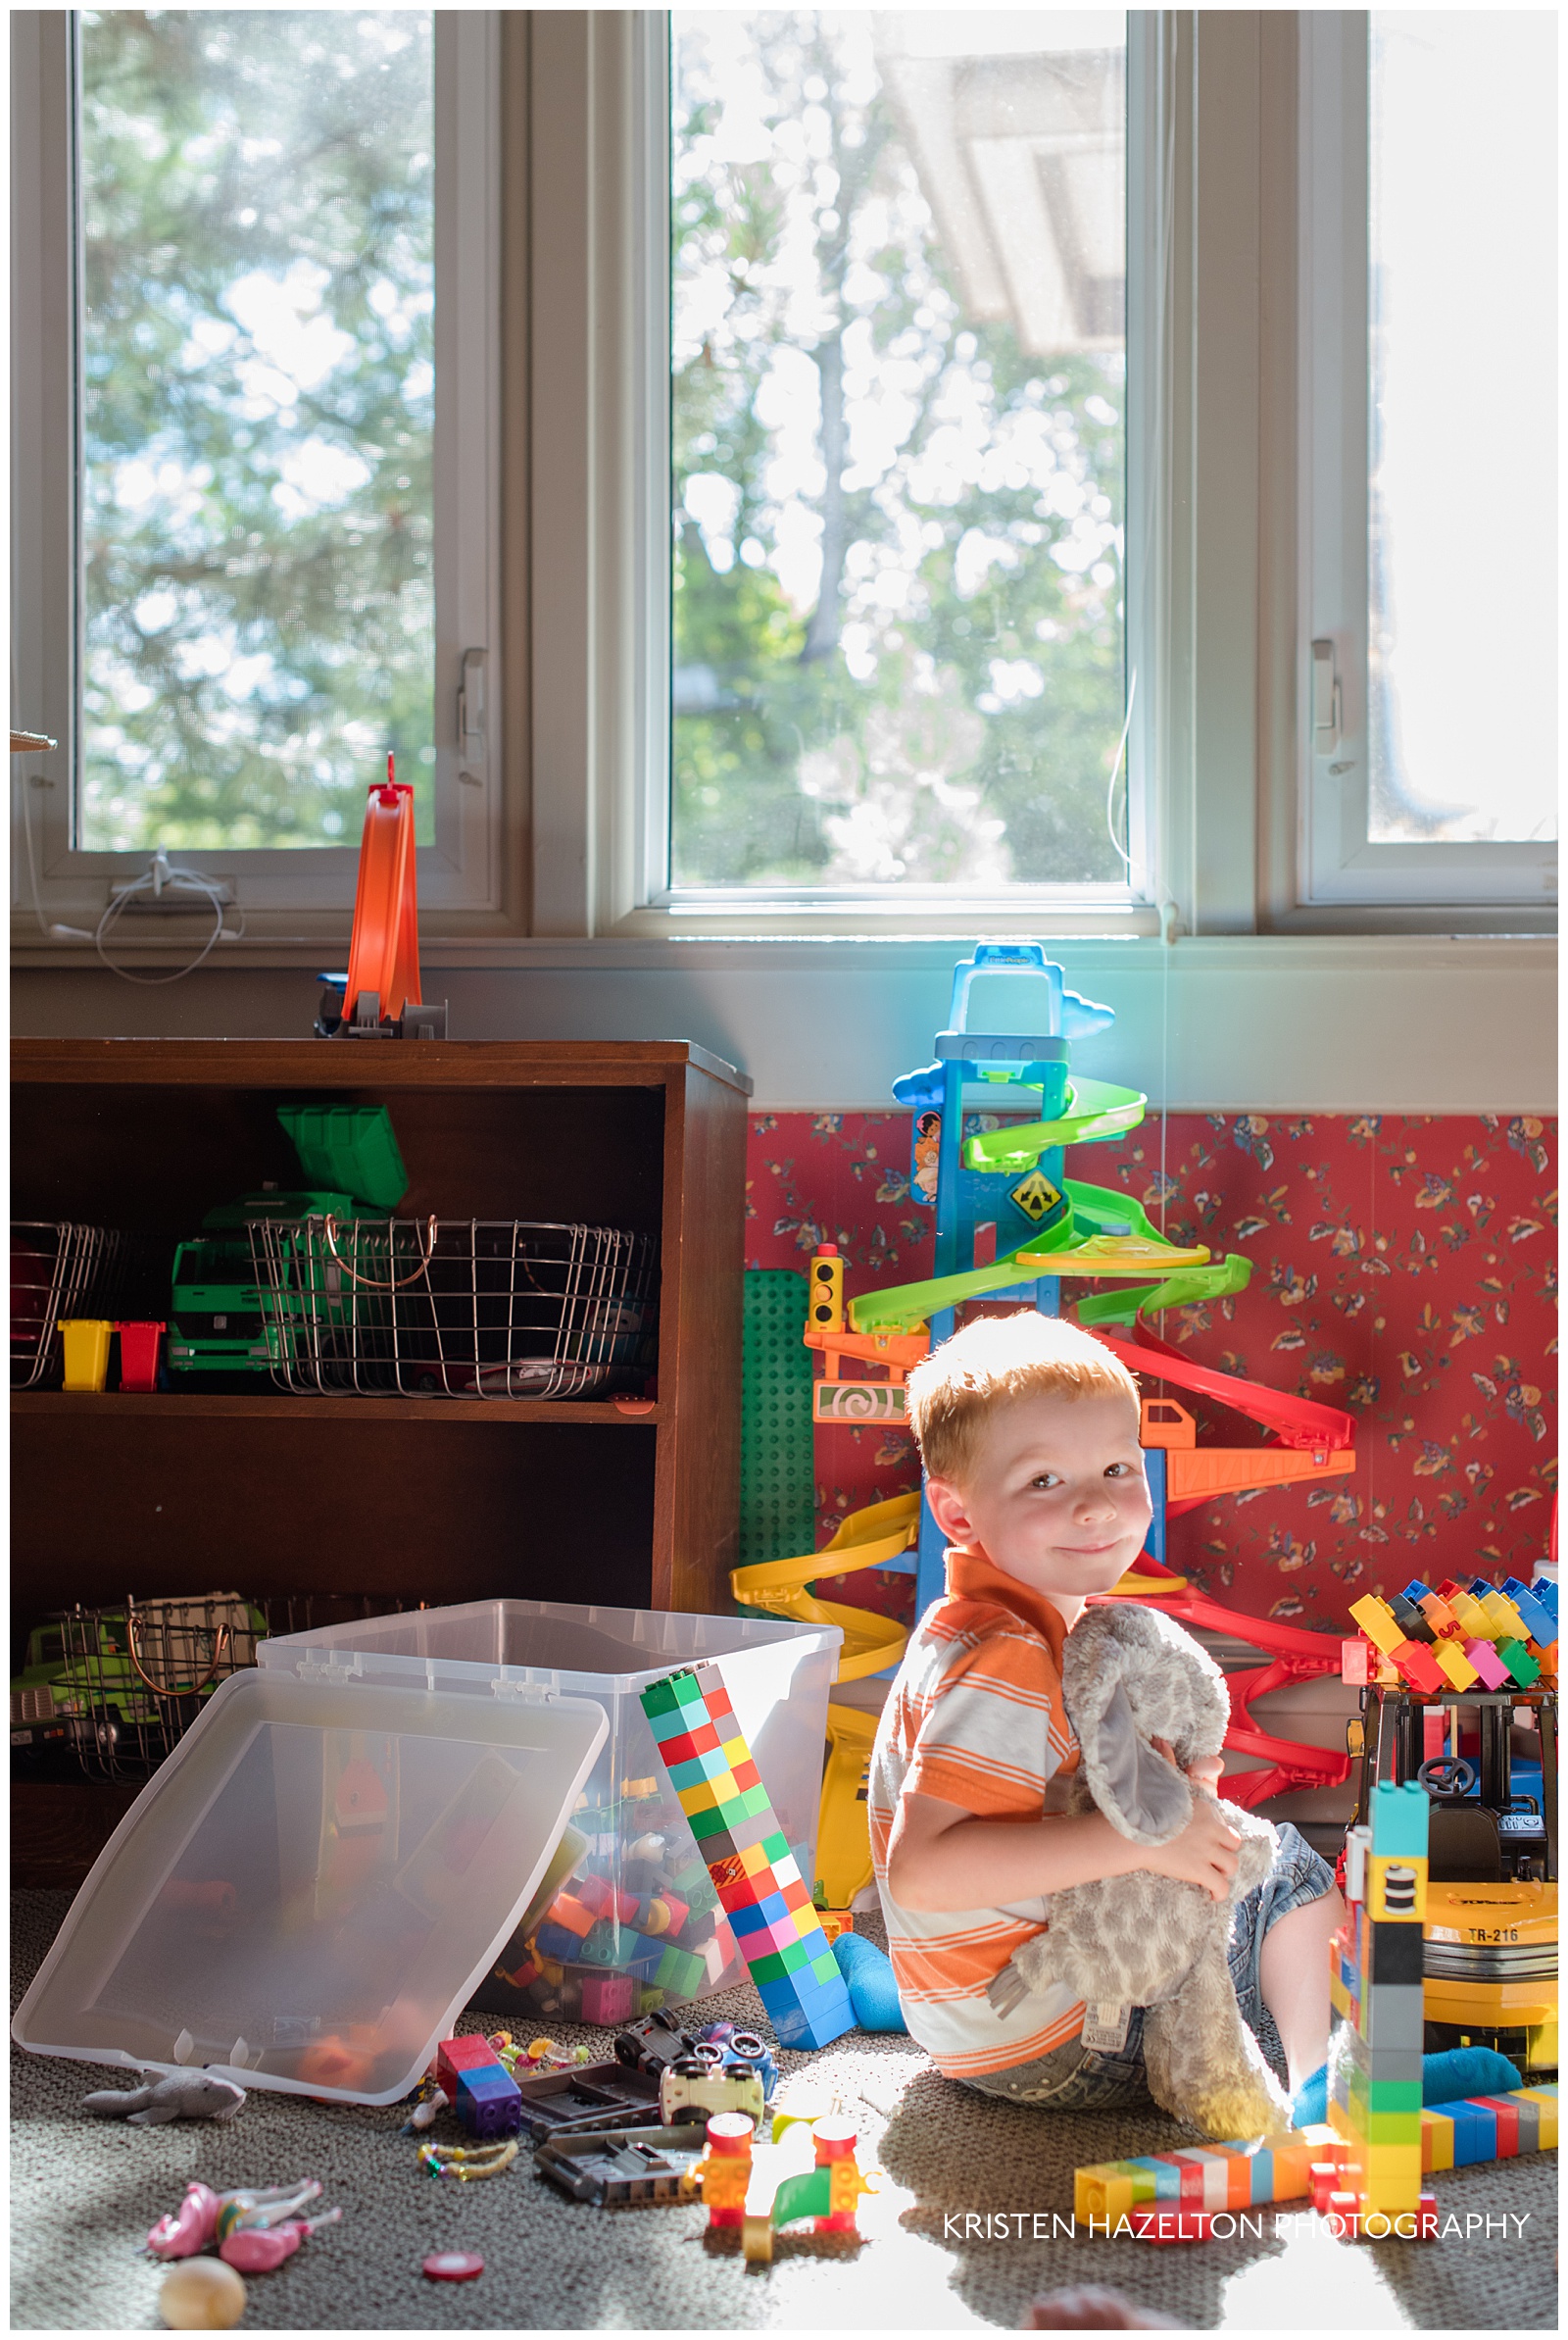 Toddler sitting in a sunbeam and playing in a playroom surrounded by toys